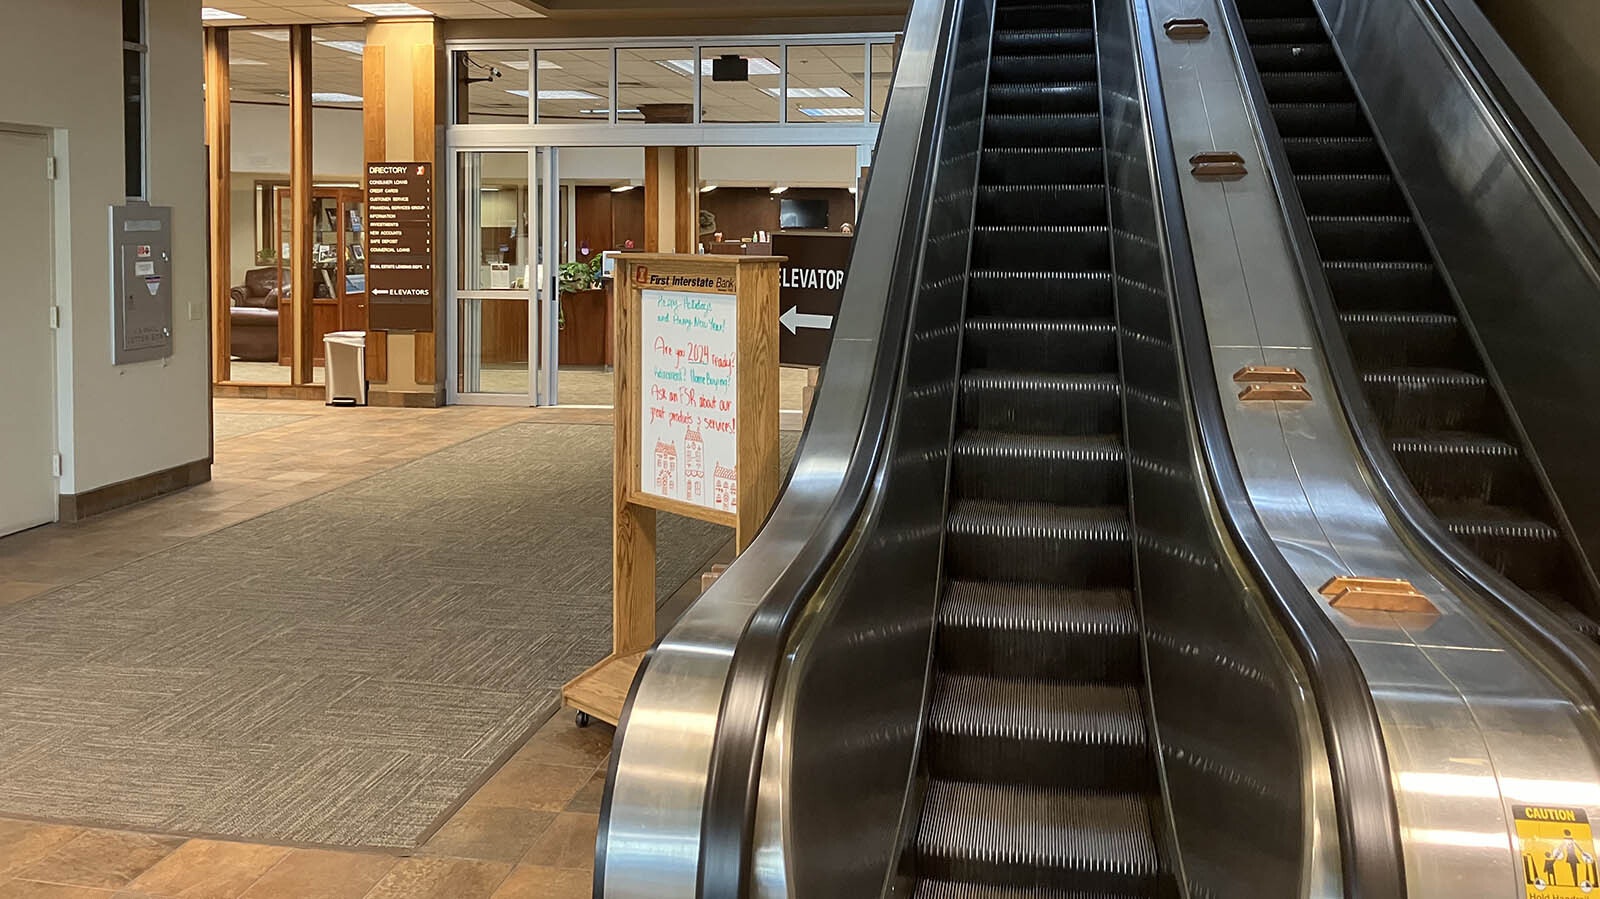 One of only two escalators in Wyoming is part of the sale of the First Interstate Bank building at 104 S. Wolcott St. in Casper.